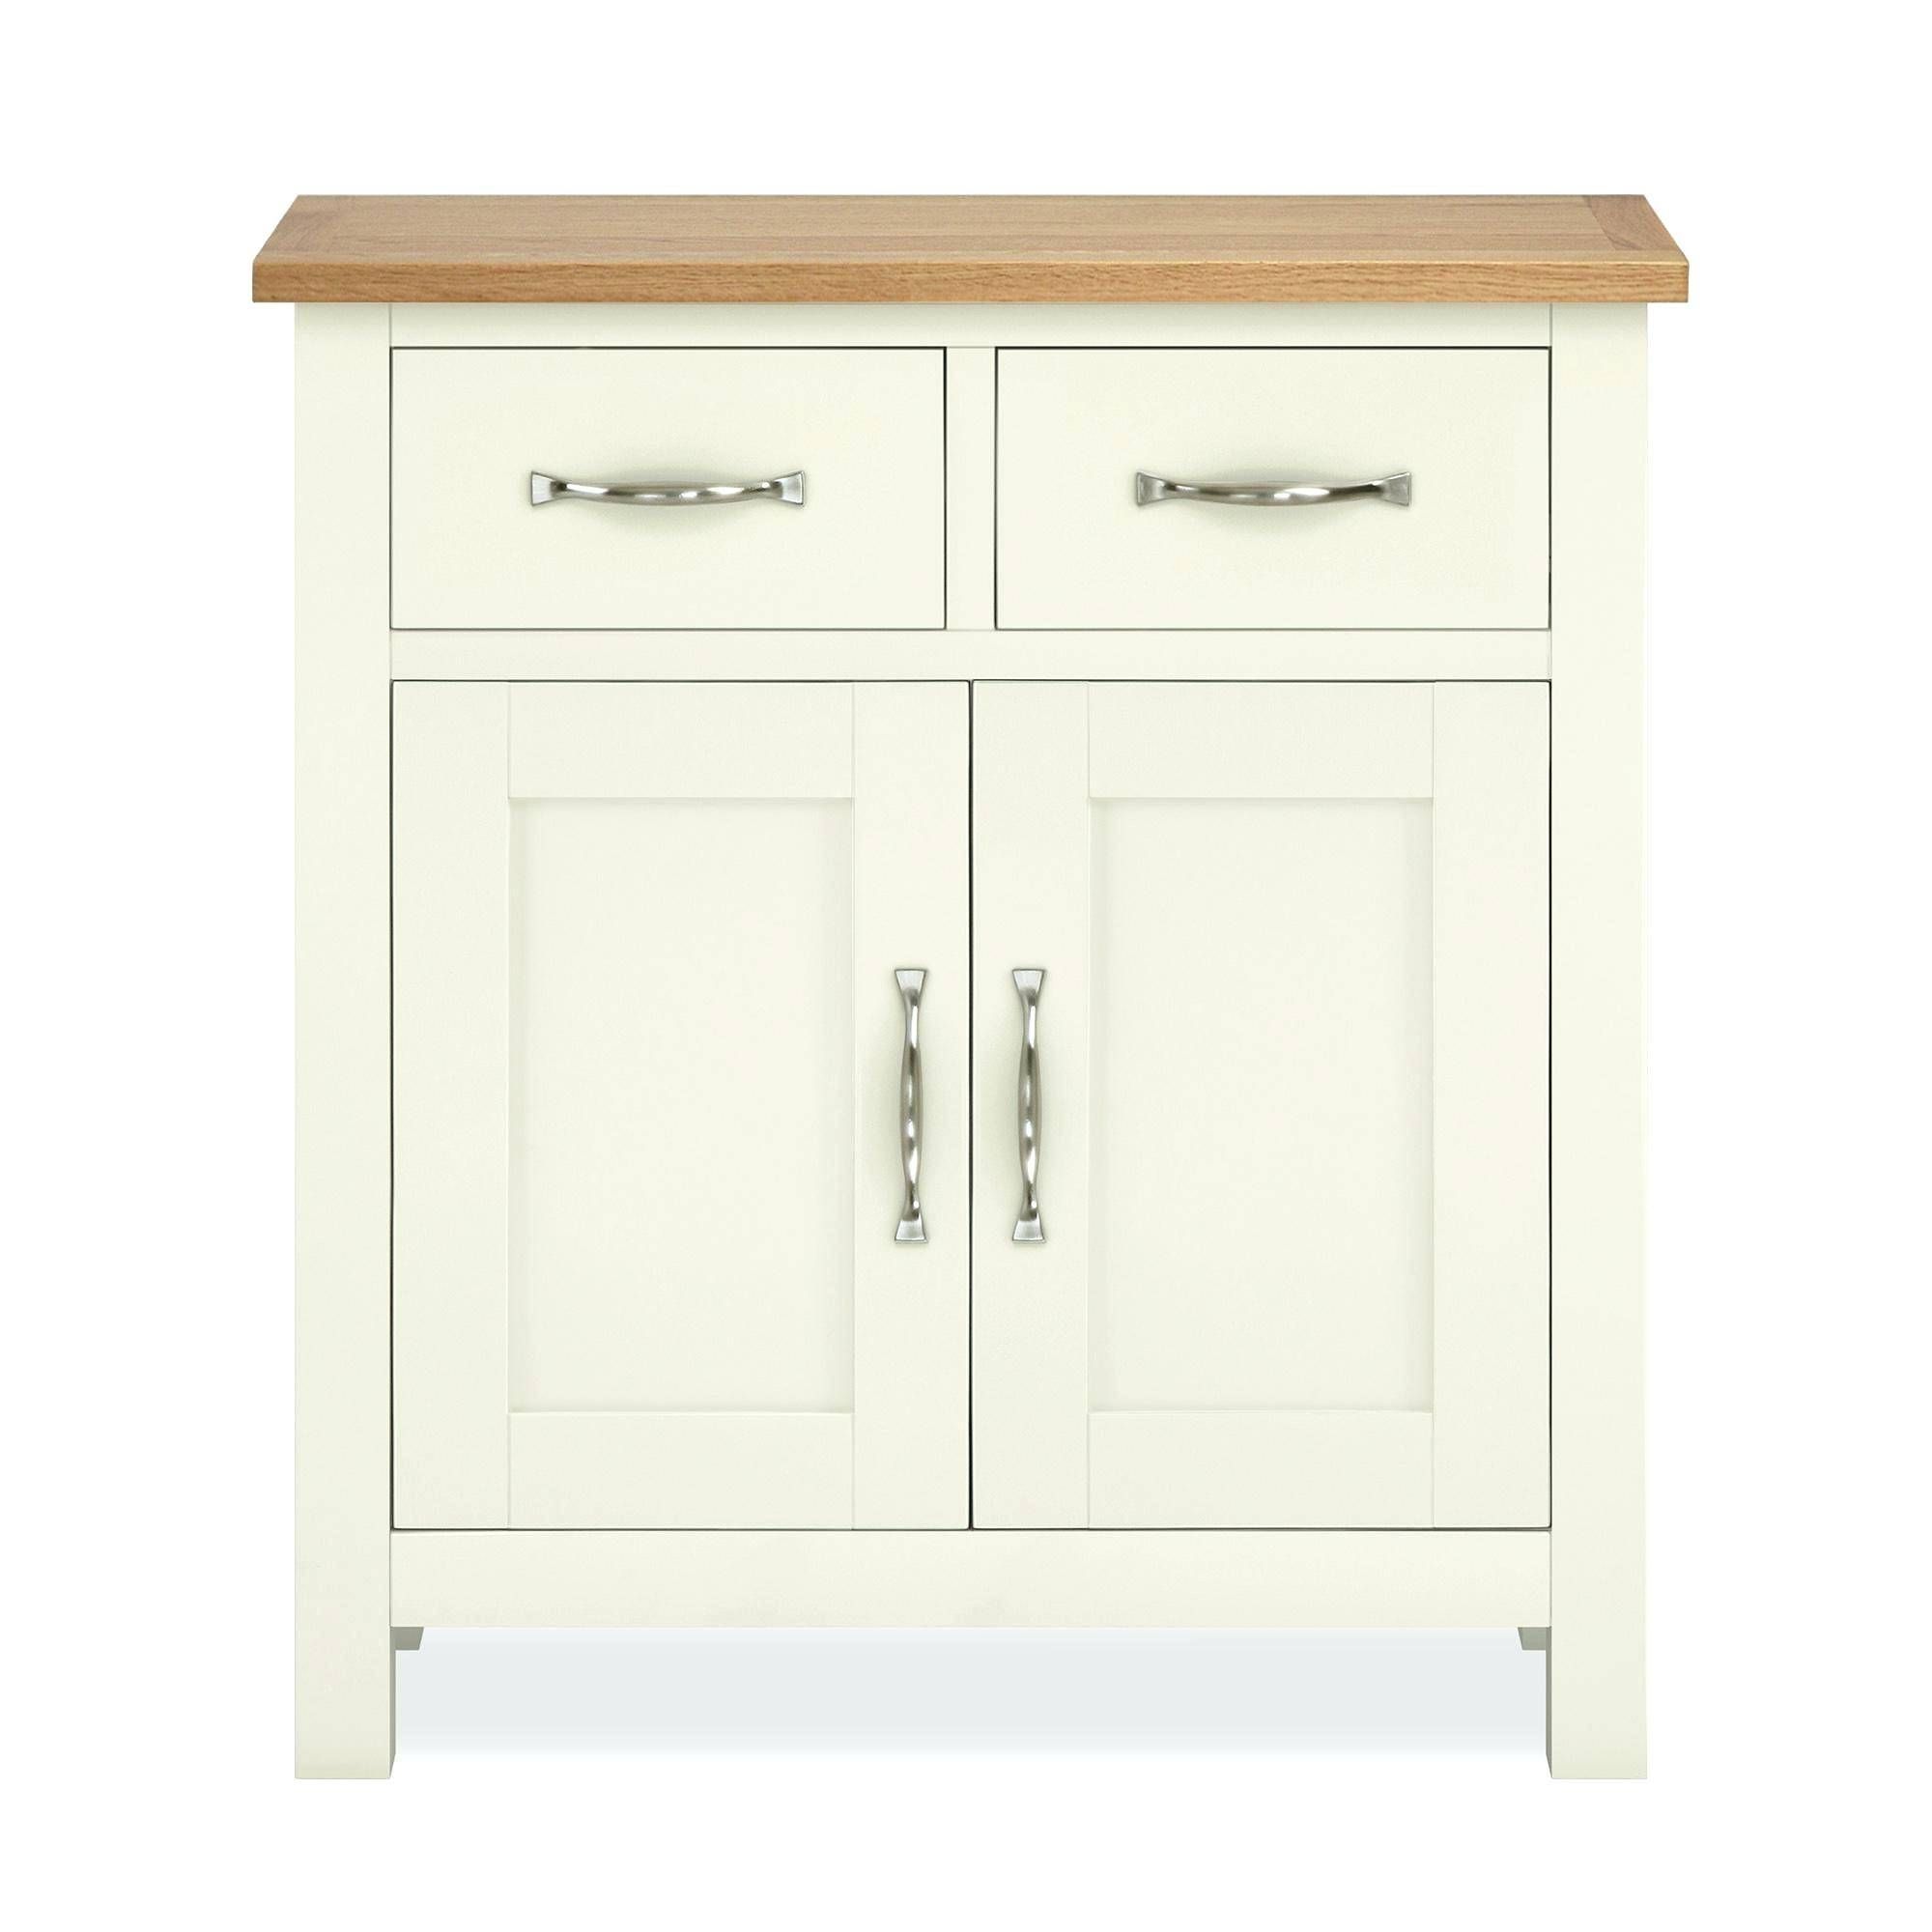 Cream Sideboard Mark Oak And Cream Sideboard Medium Cream High In Most Up To Date Cream Gloss Sideboards 